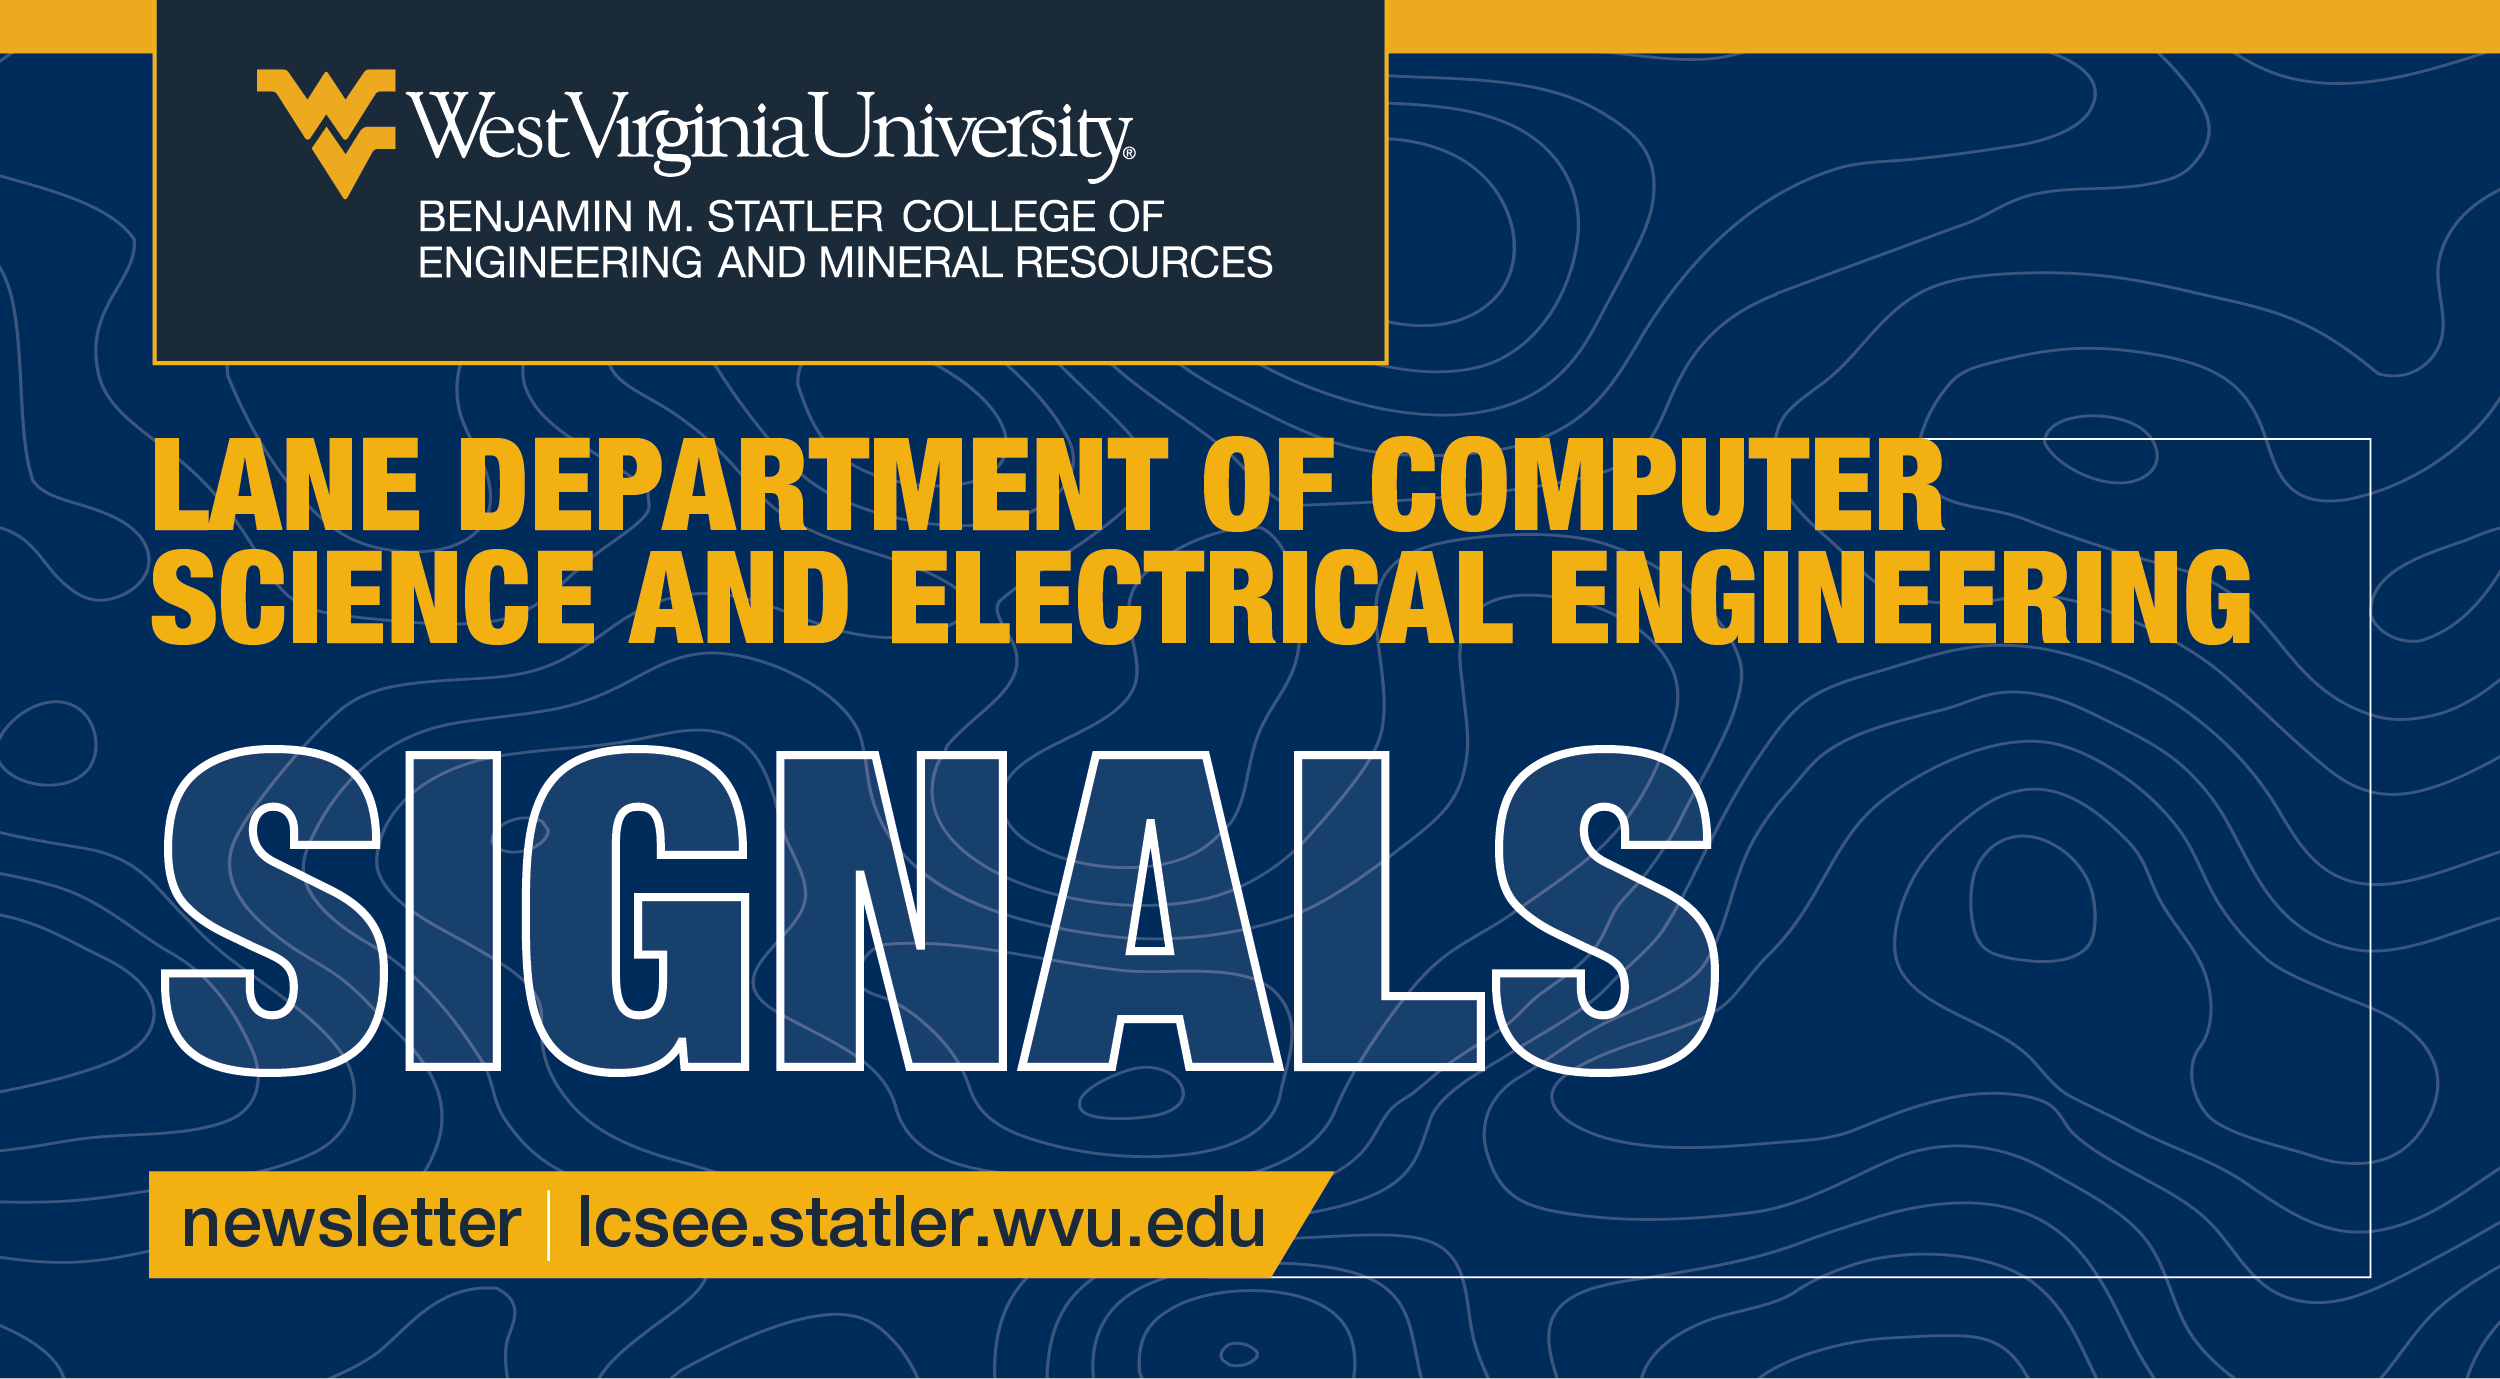 WVU Benjamin M. Statler College of Engineering and Mineral Resources - Lane Department of Computer Science and Electrical Engineering - Signals newsletter - lcsee.statler.wvu.edu